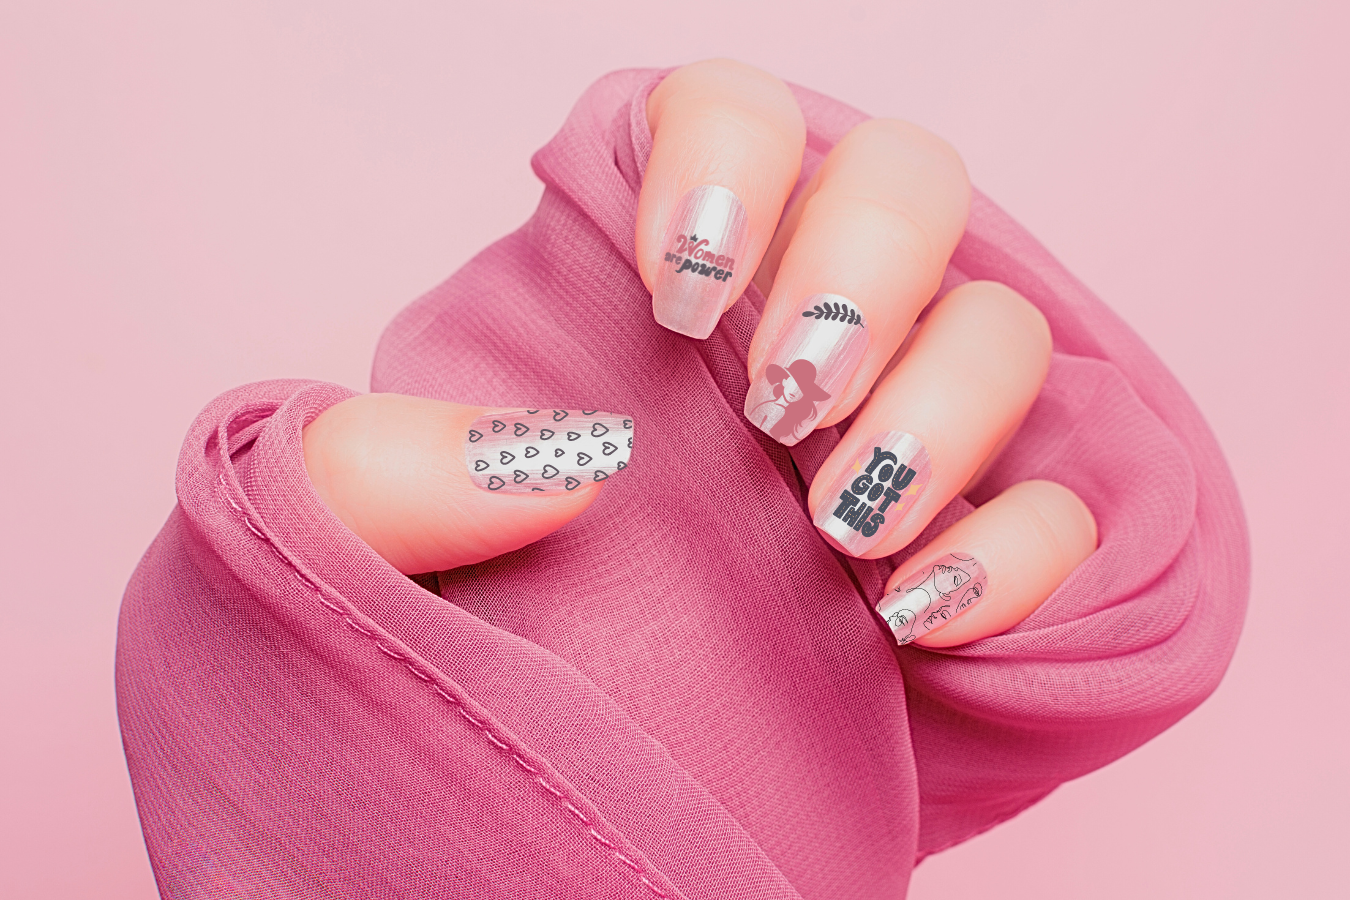 10 Nail Art Tips And Tricks For Beginners by wholesale gang - Issuu